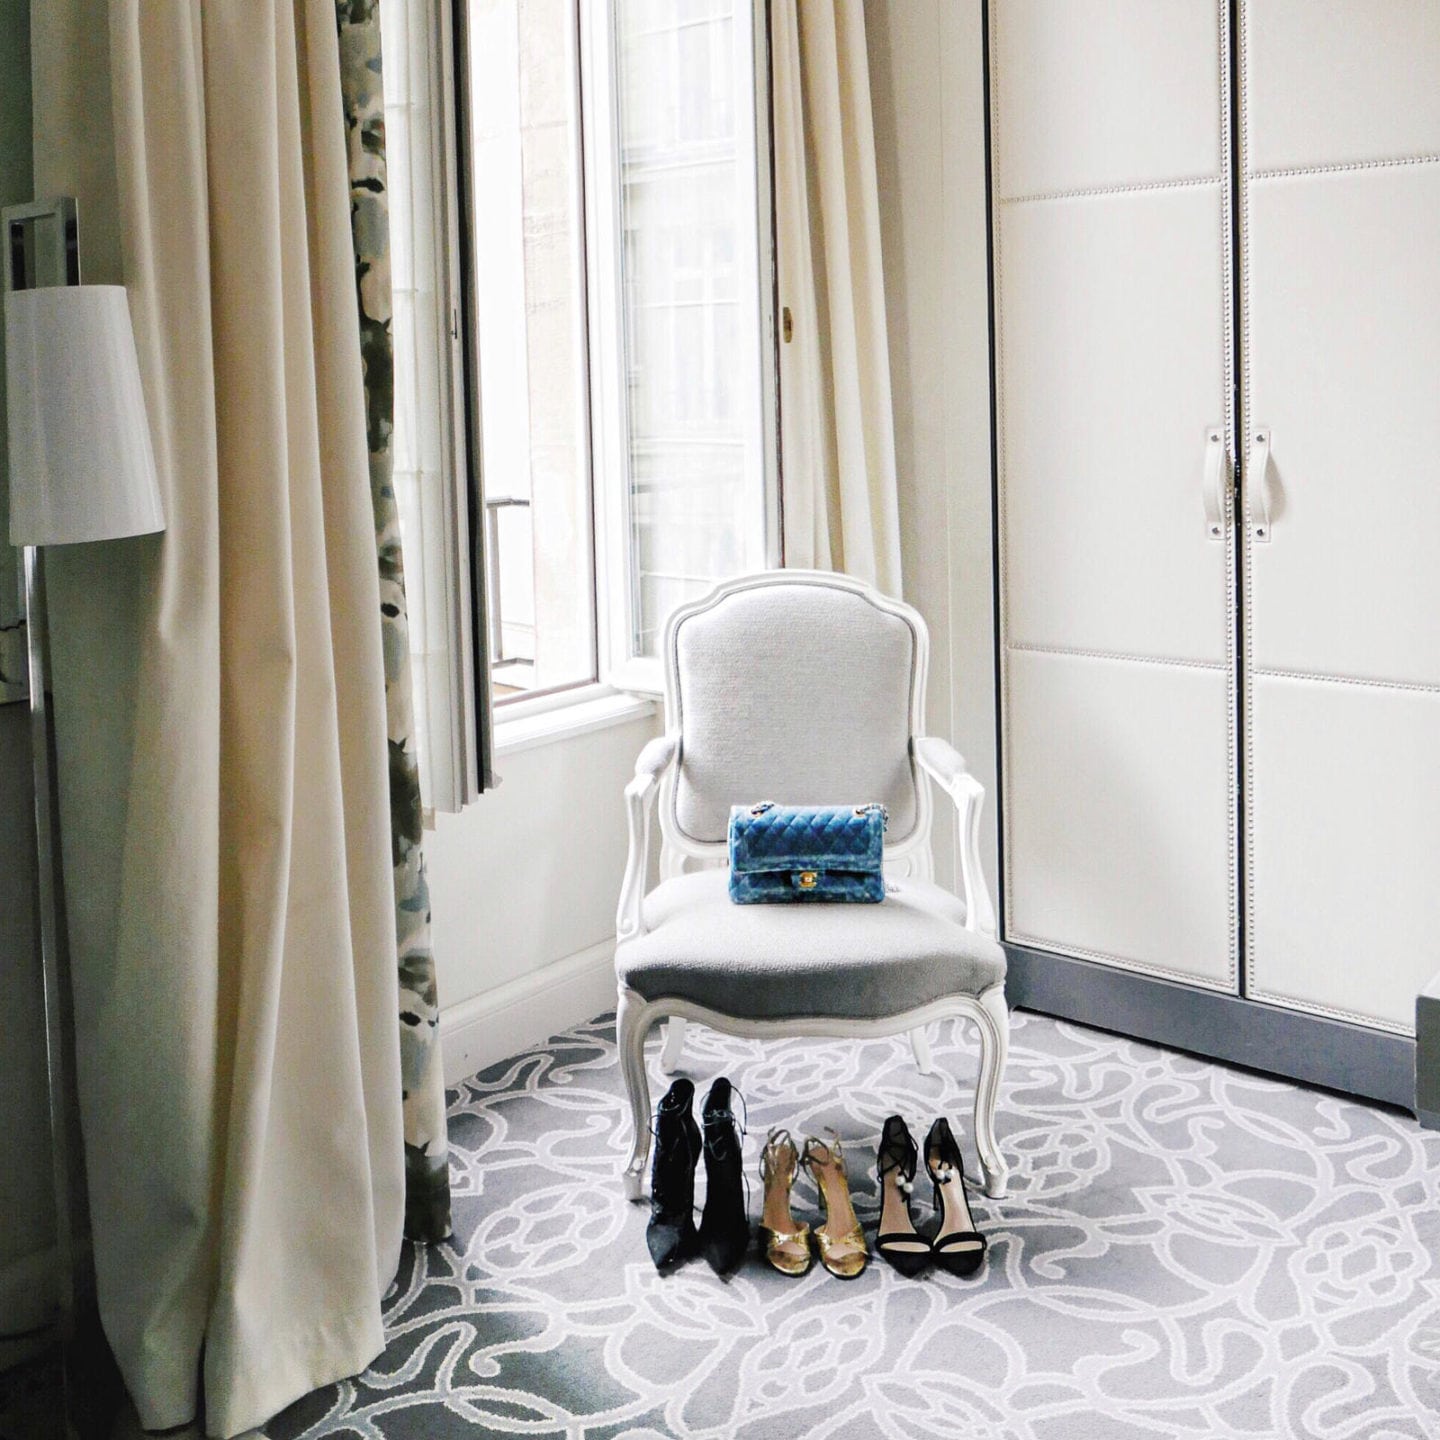 Sofitel Le Faubourg | The Girl From Panama